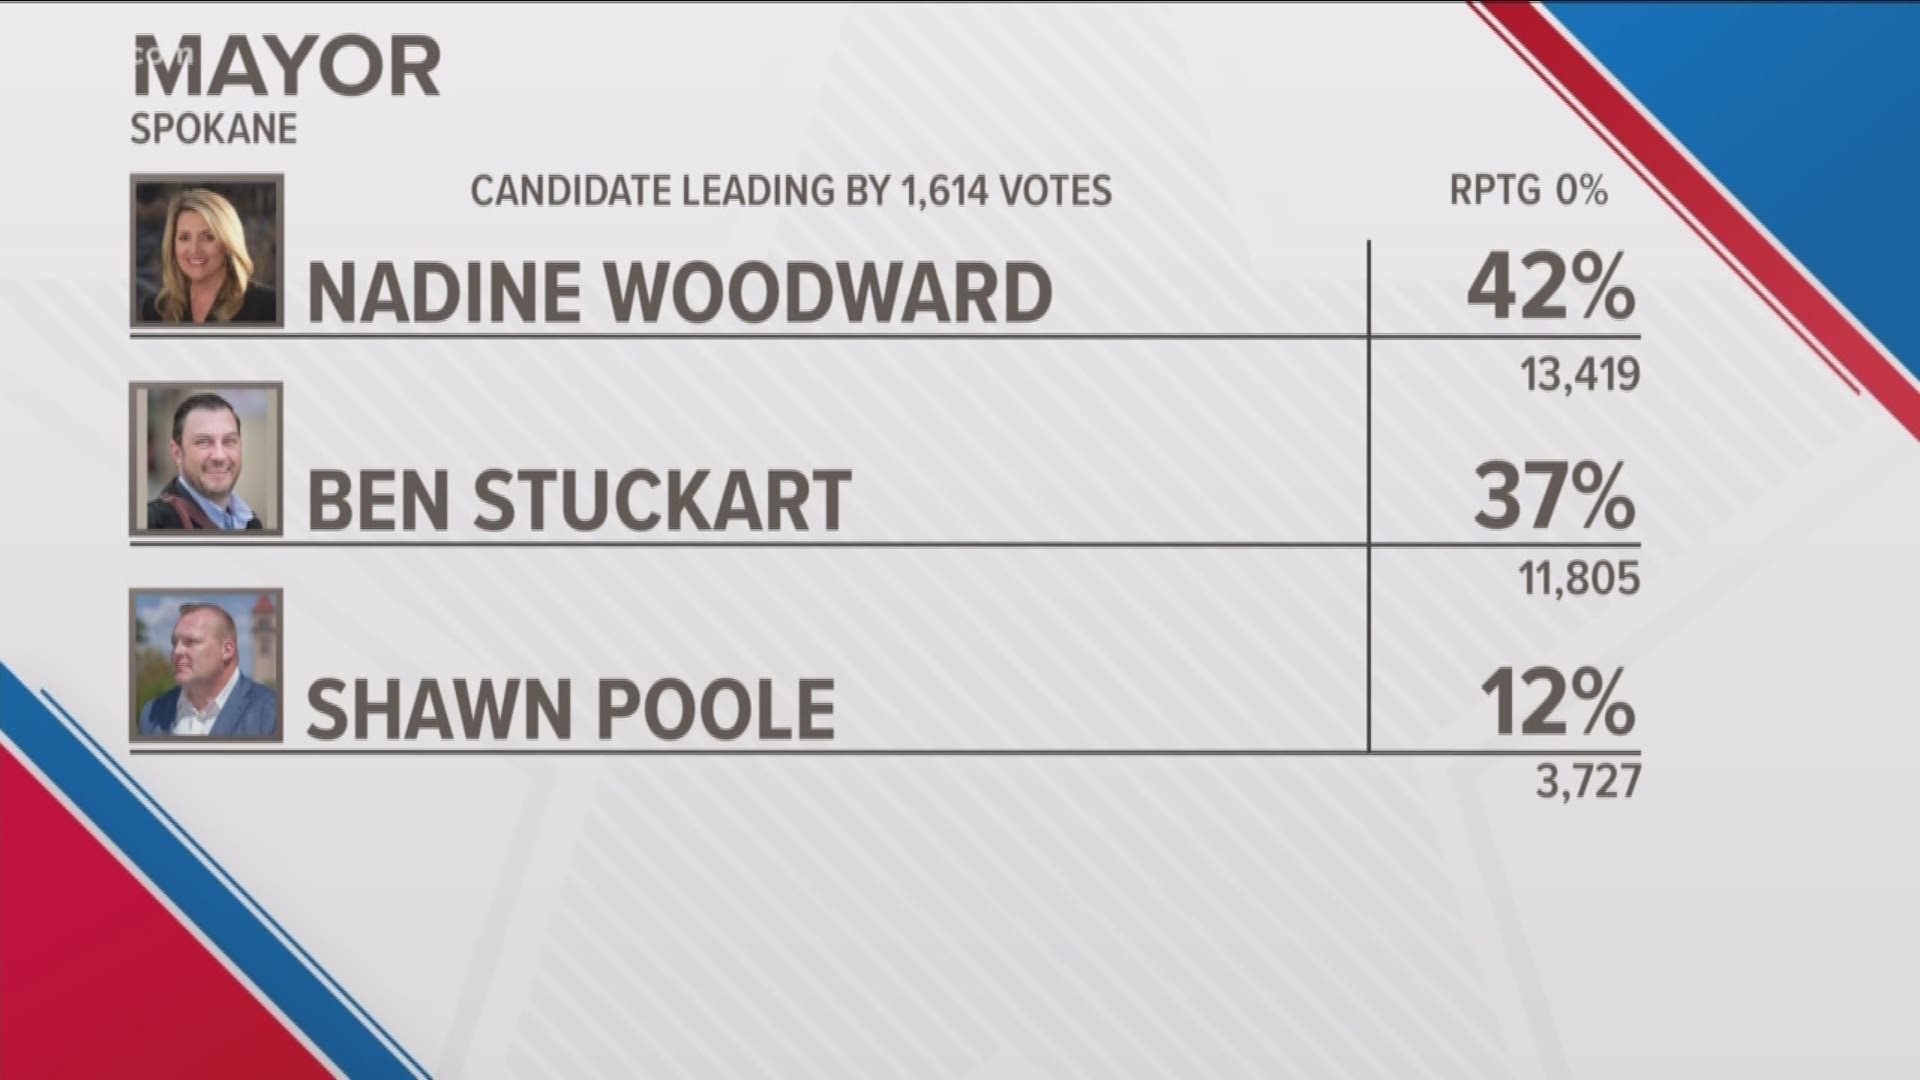 Spokane's 2019 primary elections results trickled in Tuesday, showing Nadine Woodward and Ben Stuckart leading Spokane's mayoral race.